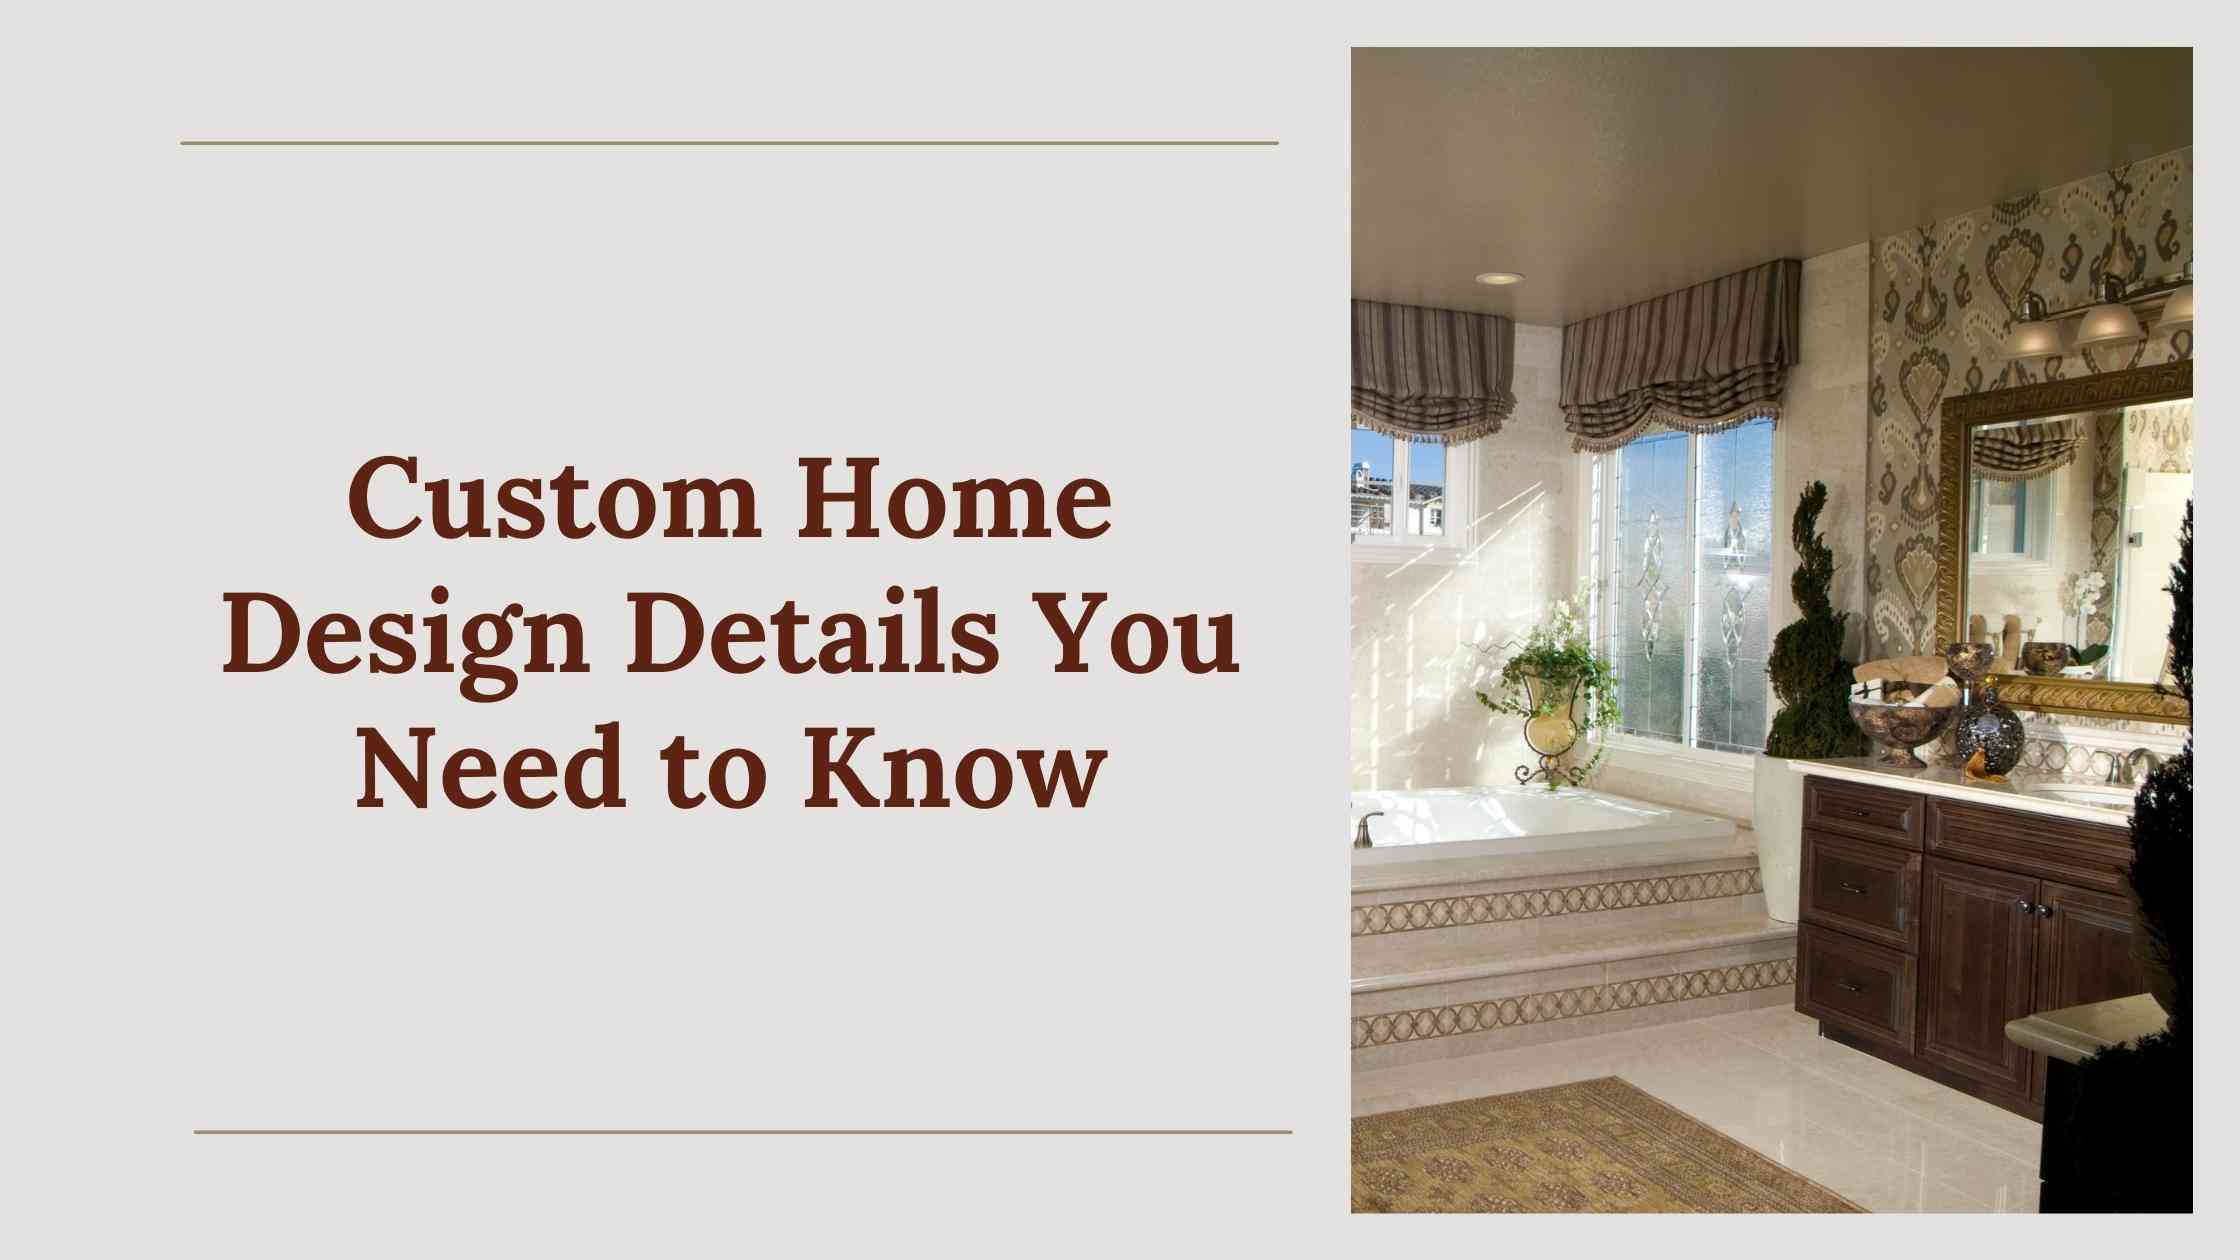 Custom Home Design Details You Need to Know